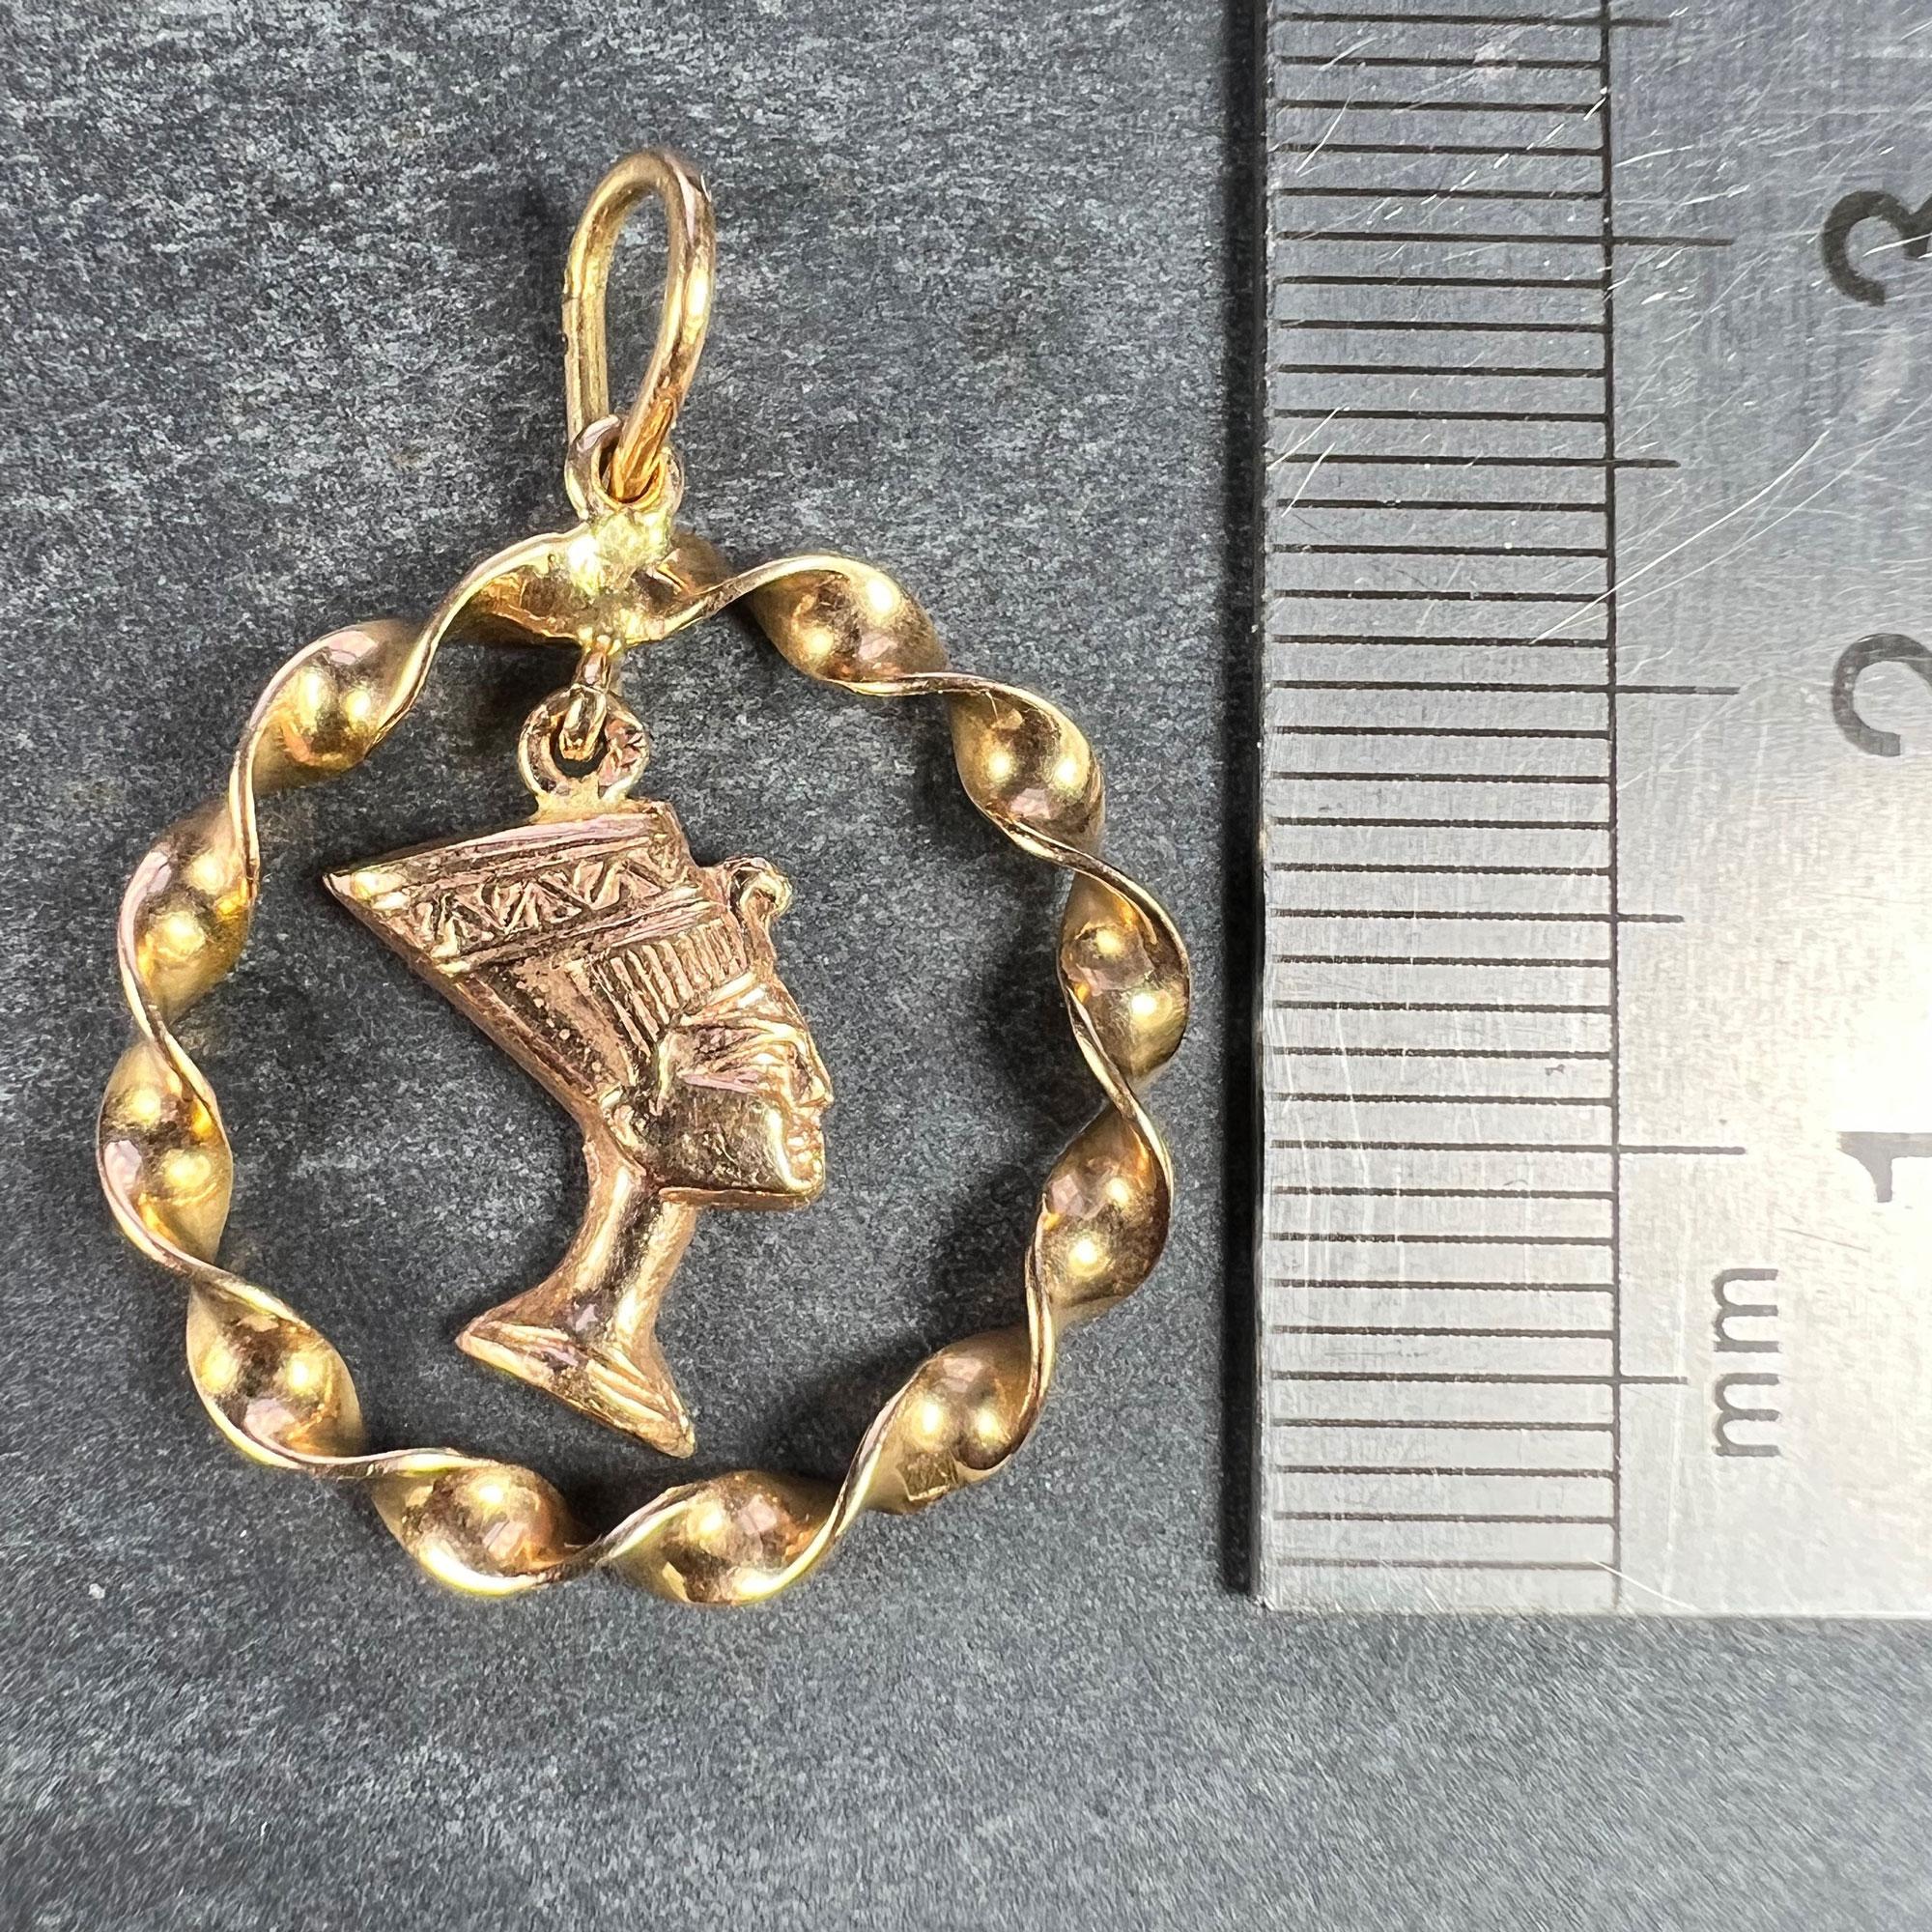 Egyptian Queen Nefertiti Bust Circle 18K Yellow Gold Charm Pendant For Sale 3